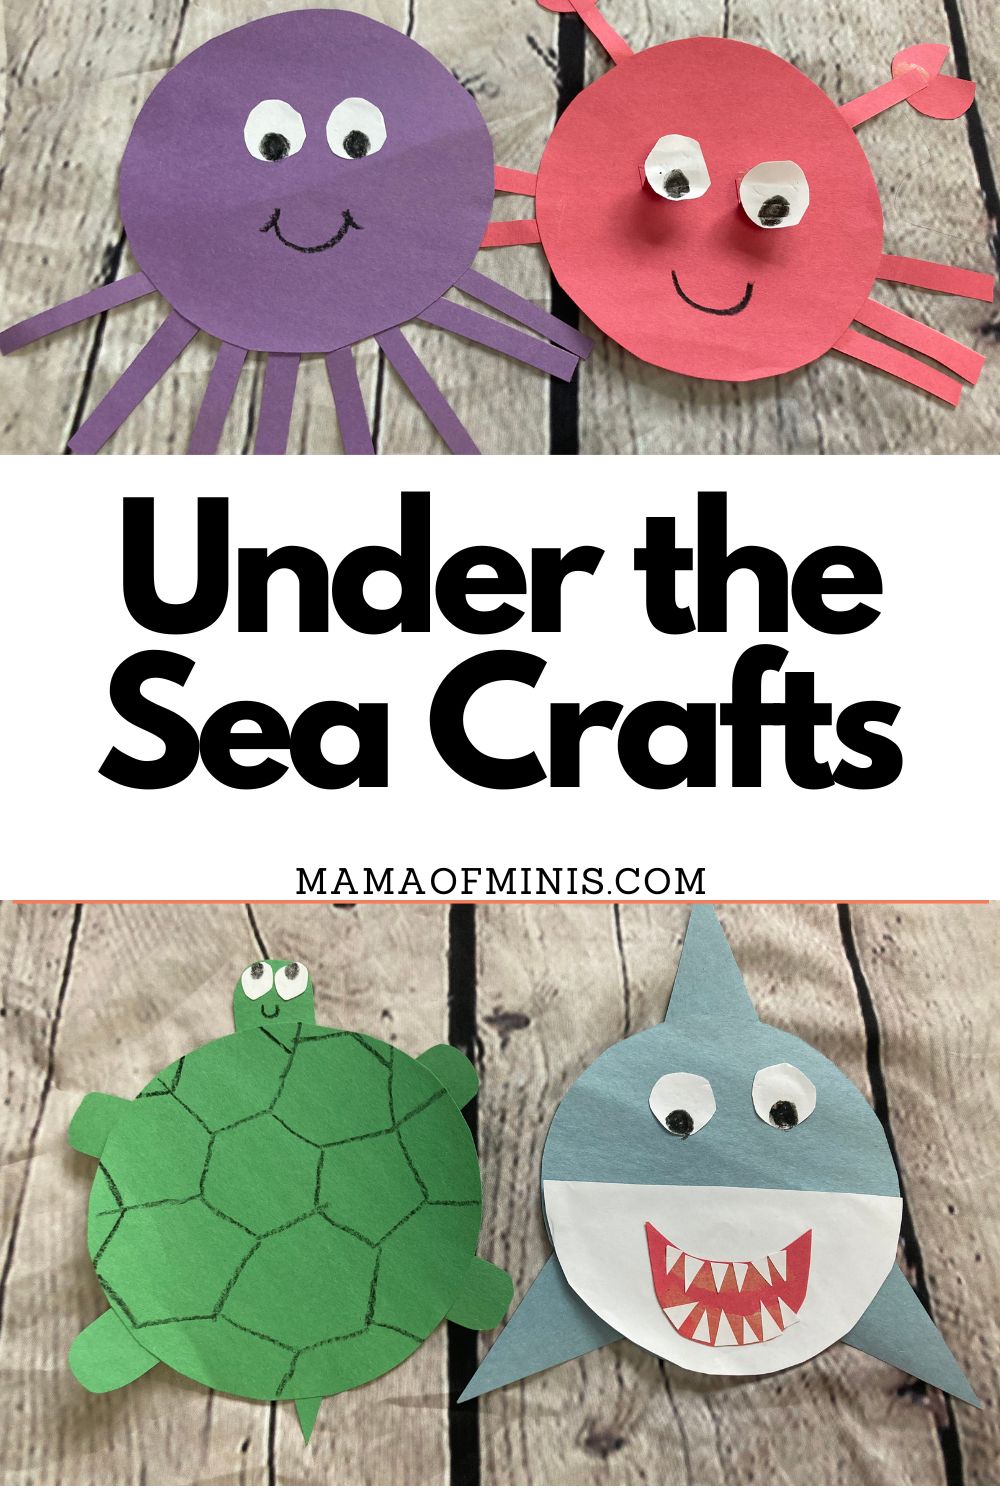 Under the Sea Crafts Pin